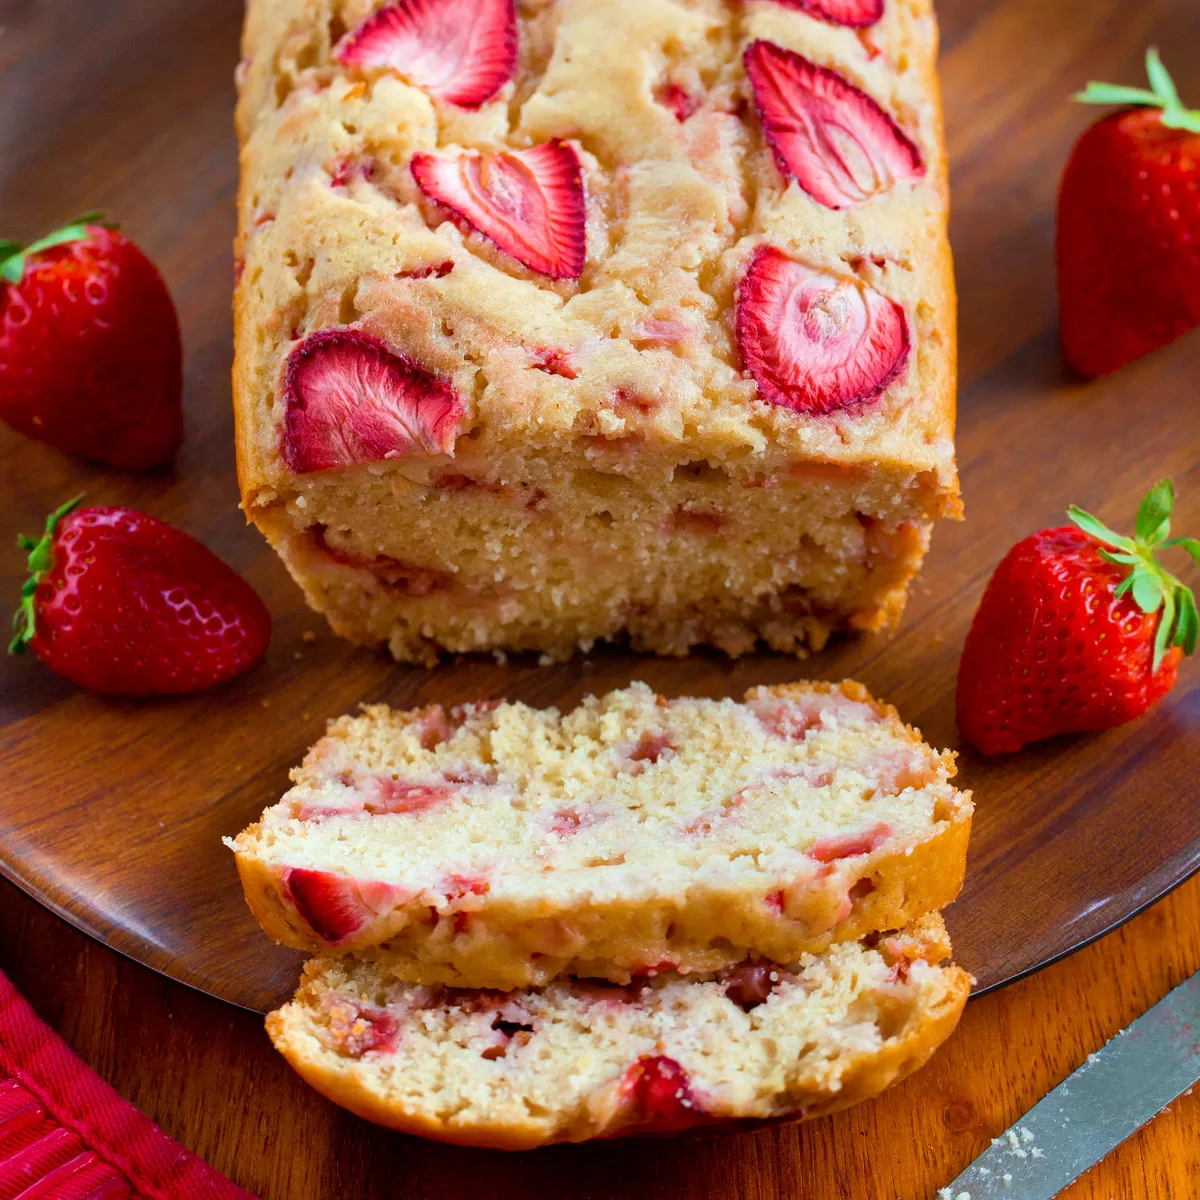 Strawberry Bread Recipe – With 2 Cups Recent Strawberries!